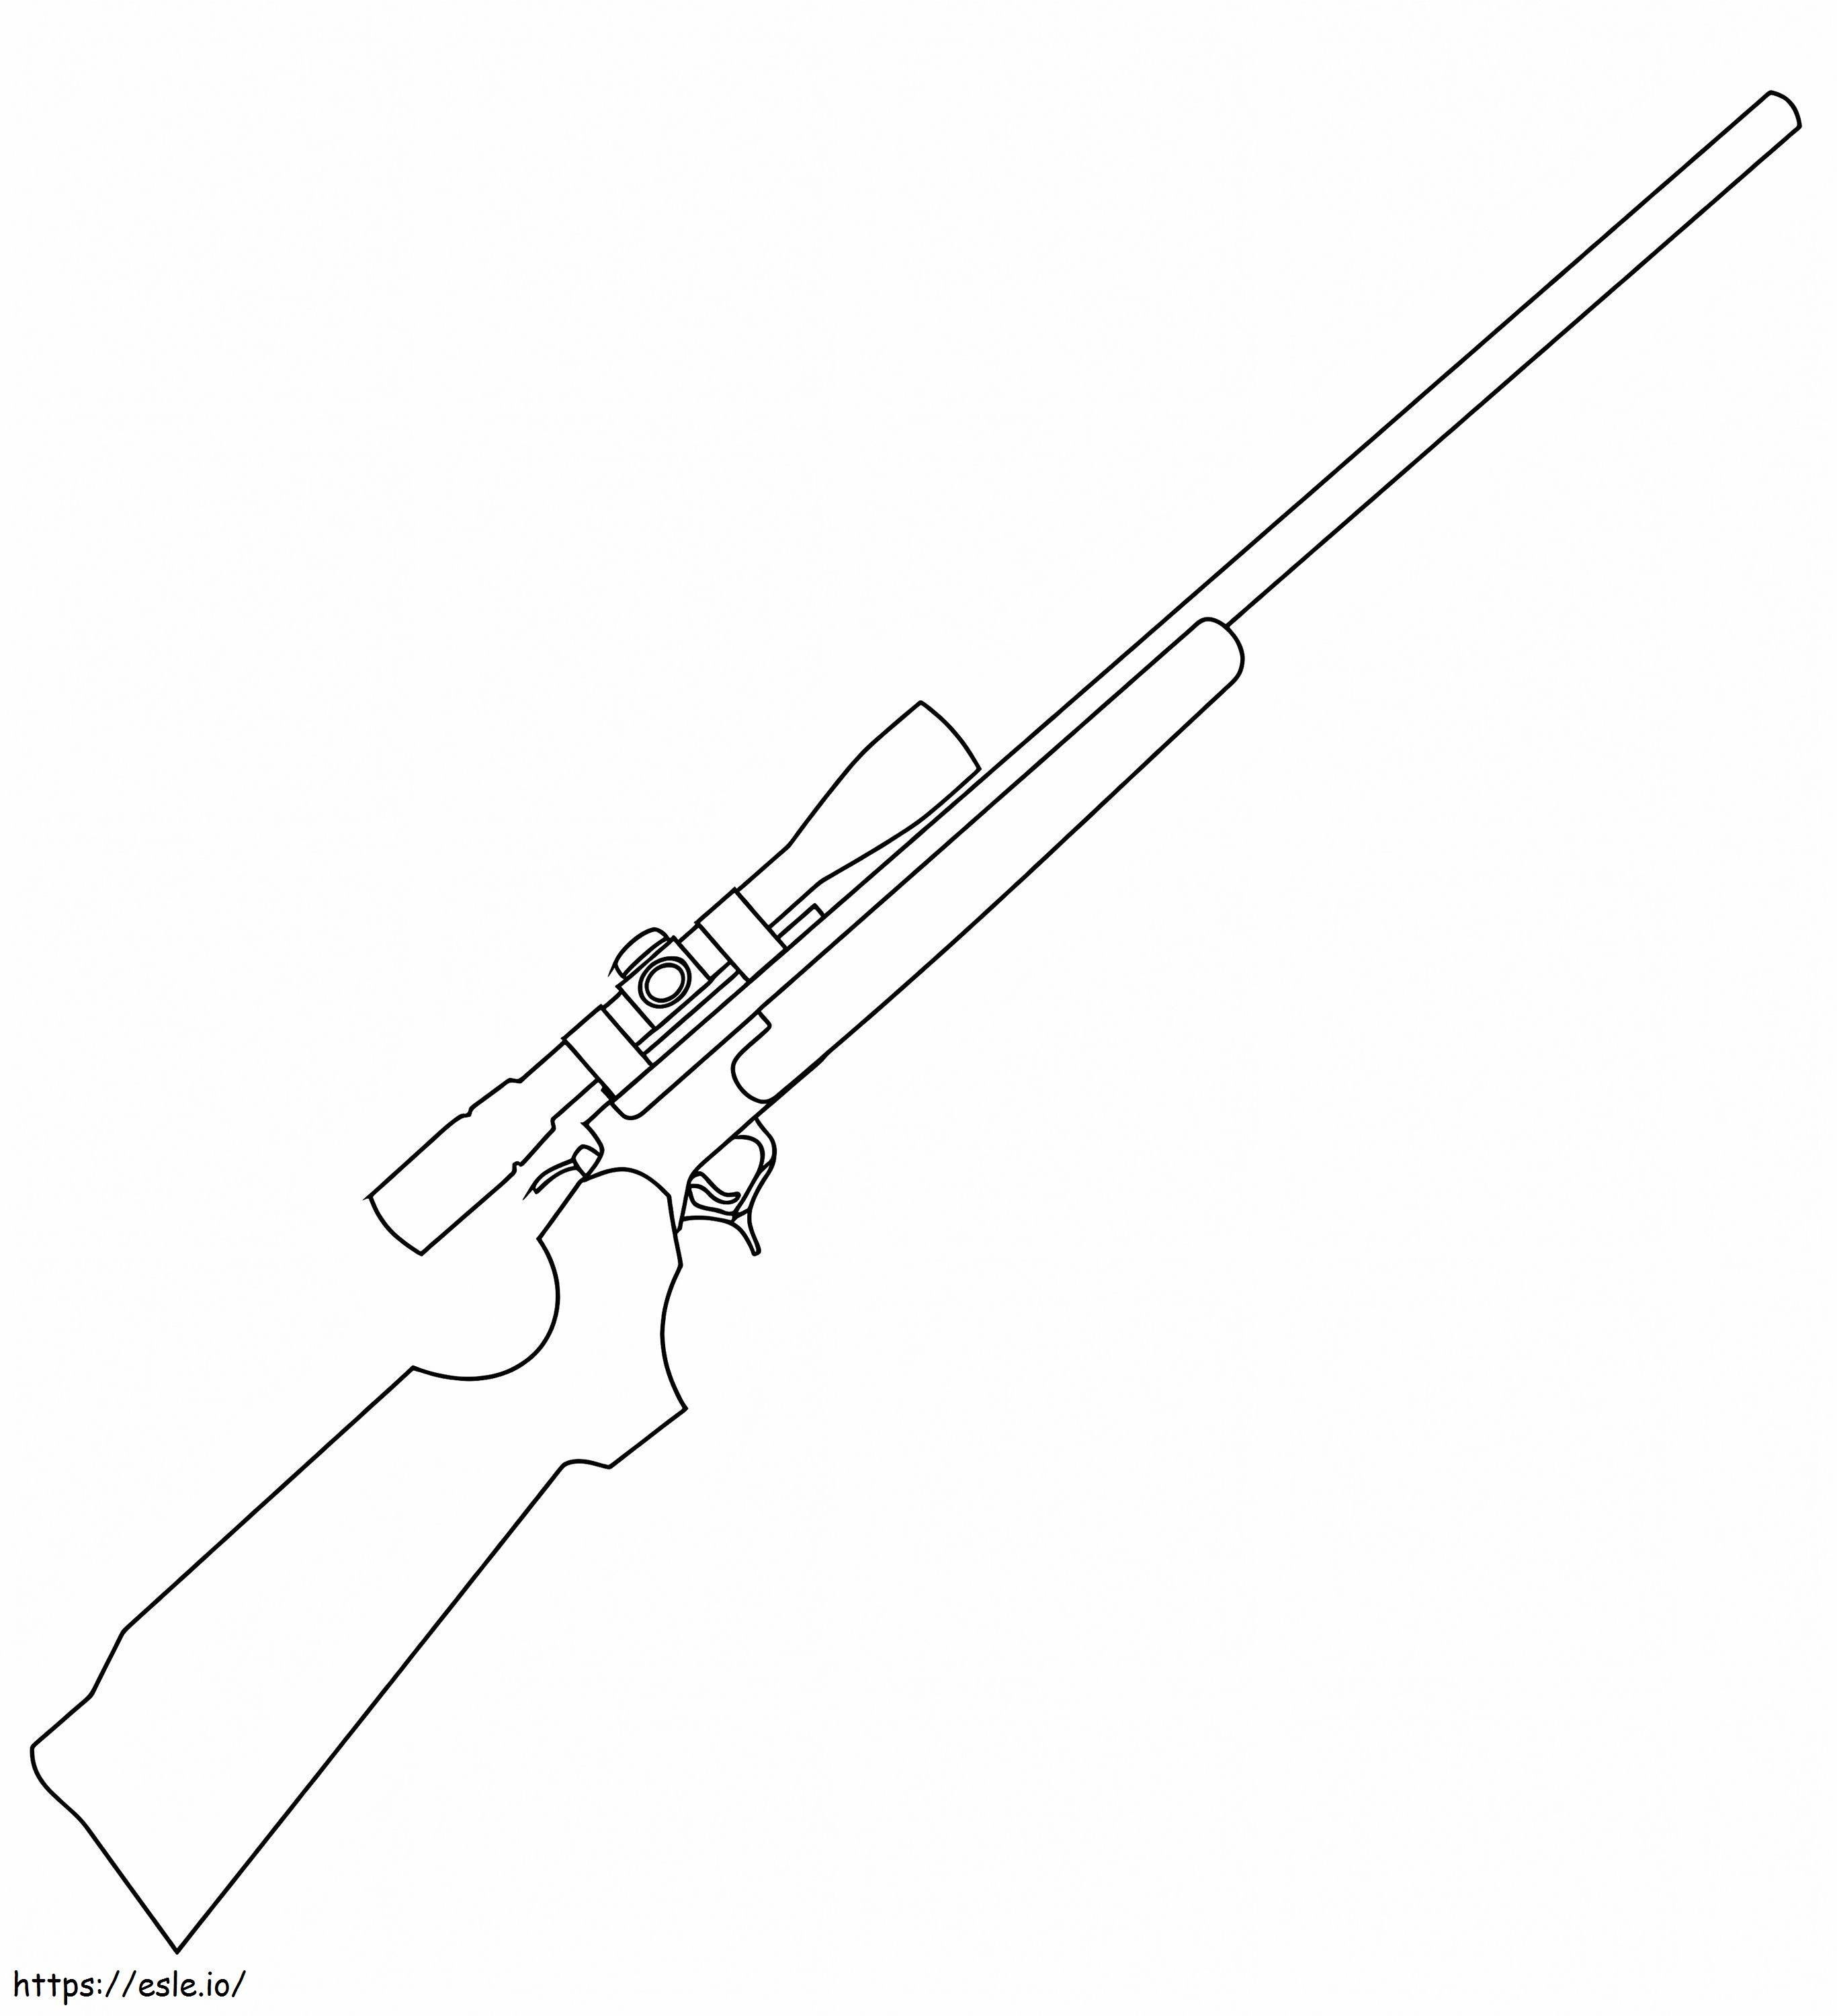 Rifle With Scope coloring page